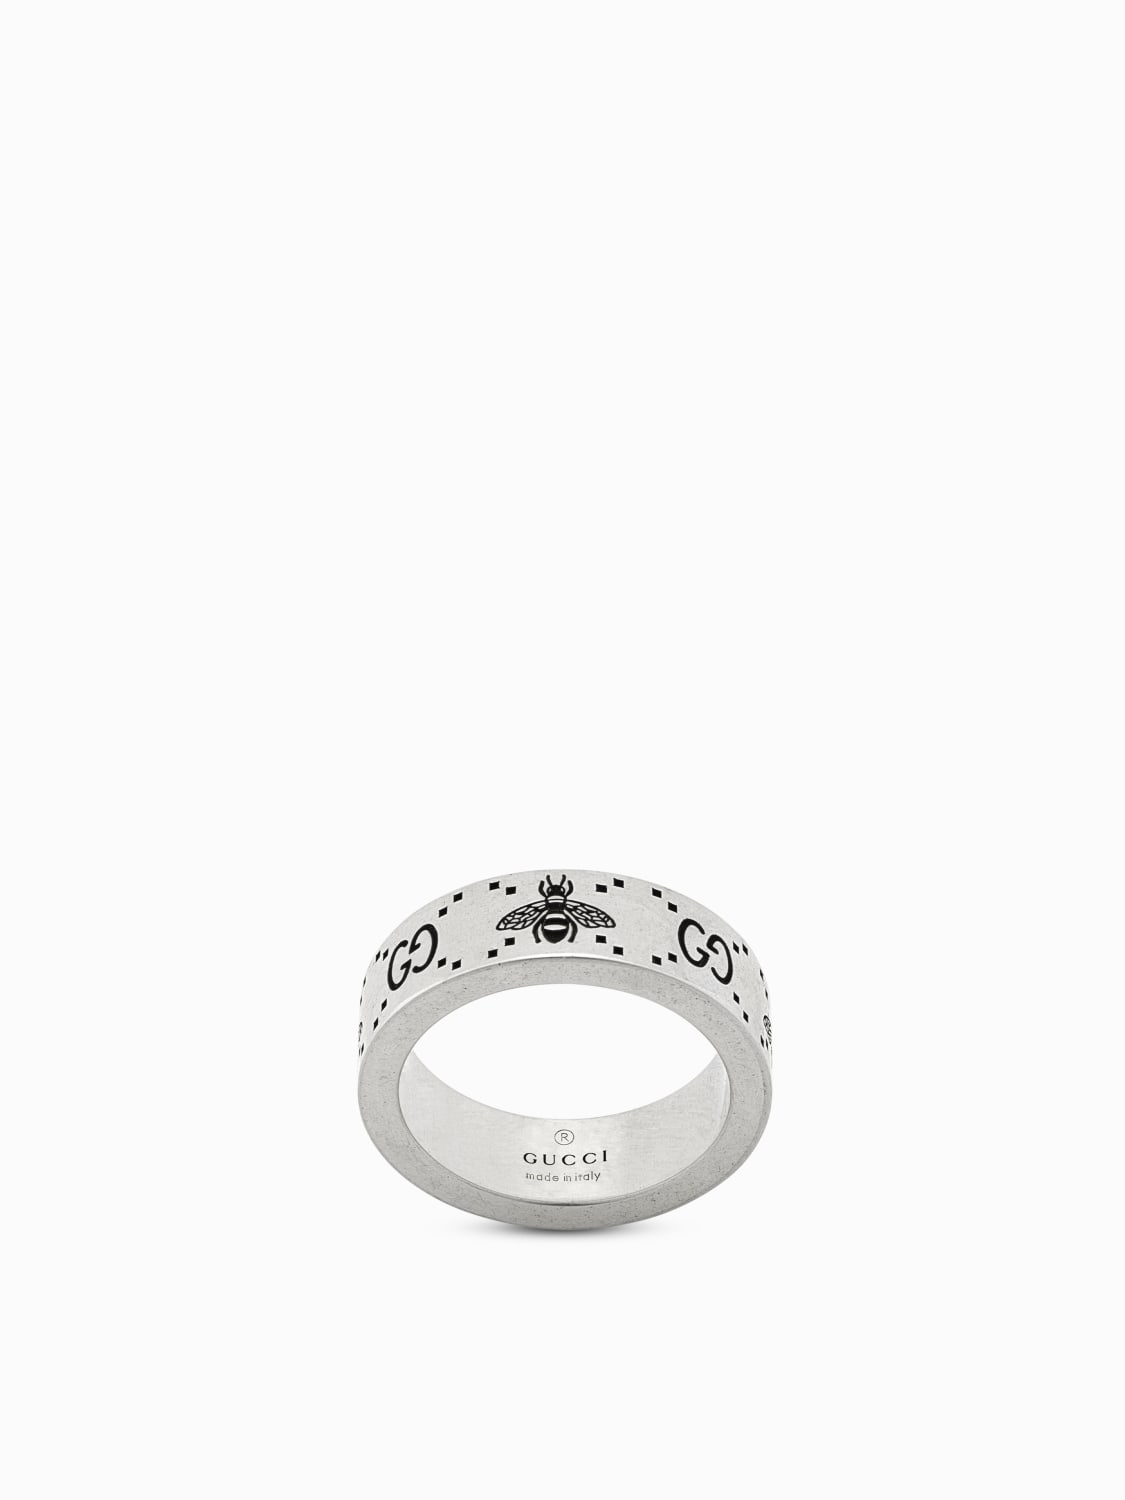 GUCCI: ring in silver with GG logo and bee engravings - Silver | Gucci ...